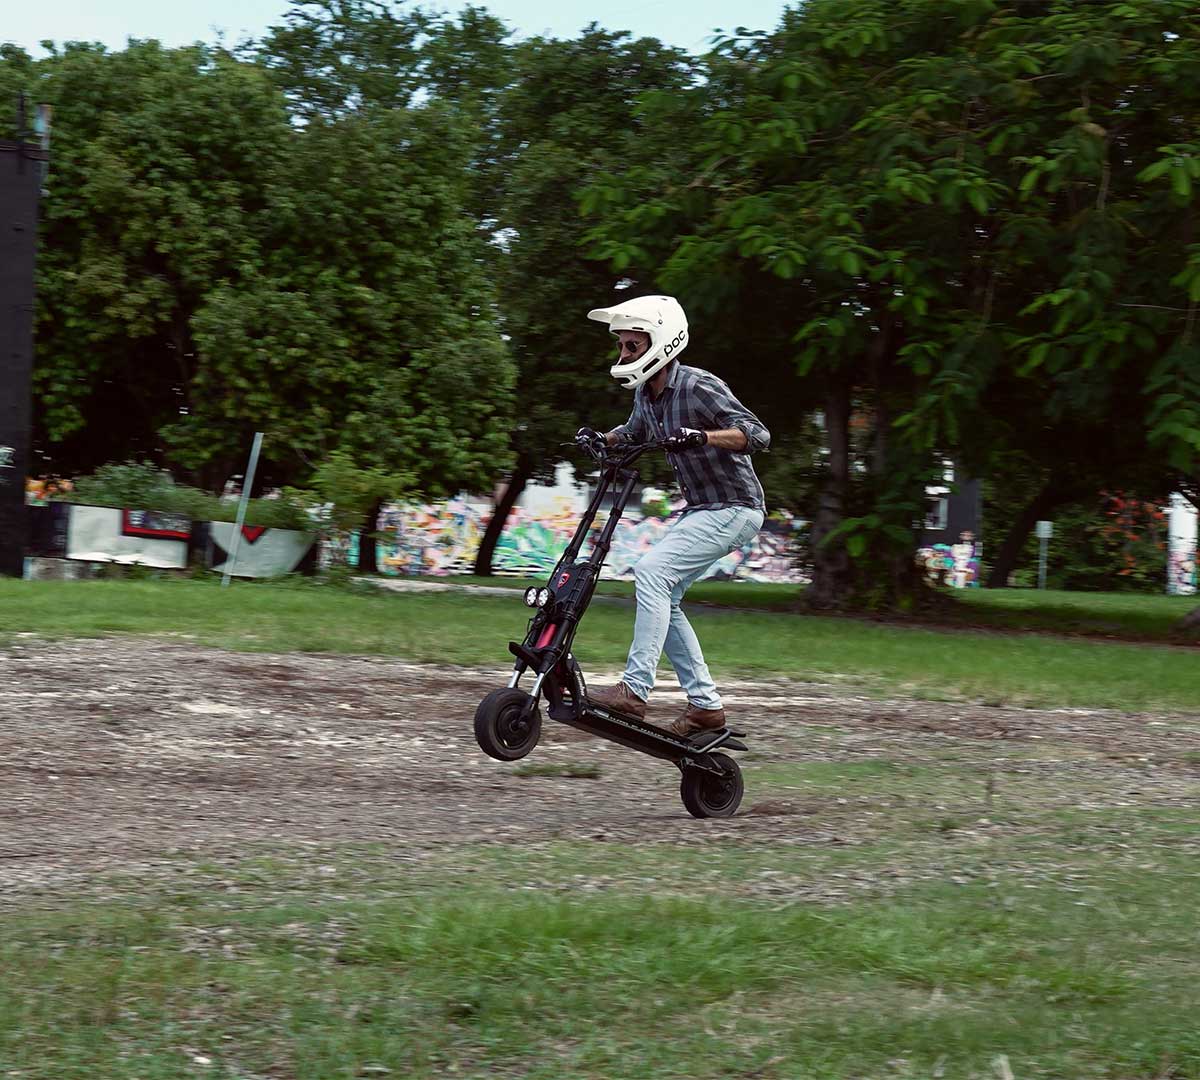 A racer in protective gear takes on an urban track on their electric scooter, demonstrating agility and speed in a cityscape setting for the Electric Scooter Racing Series Championship.